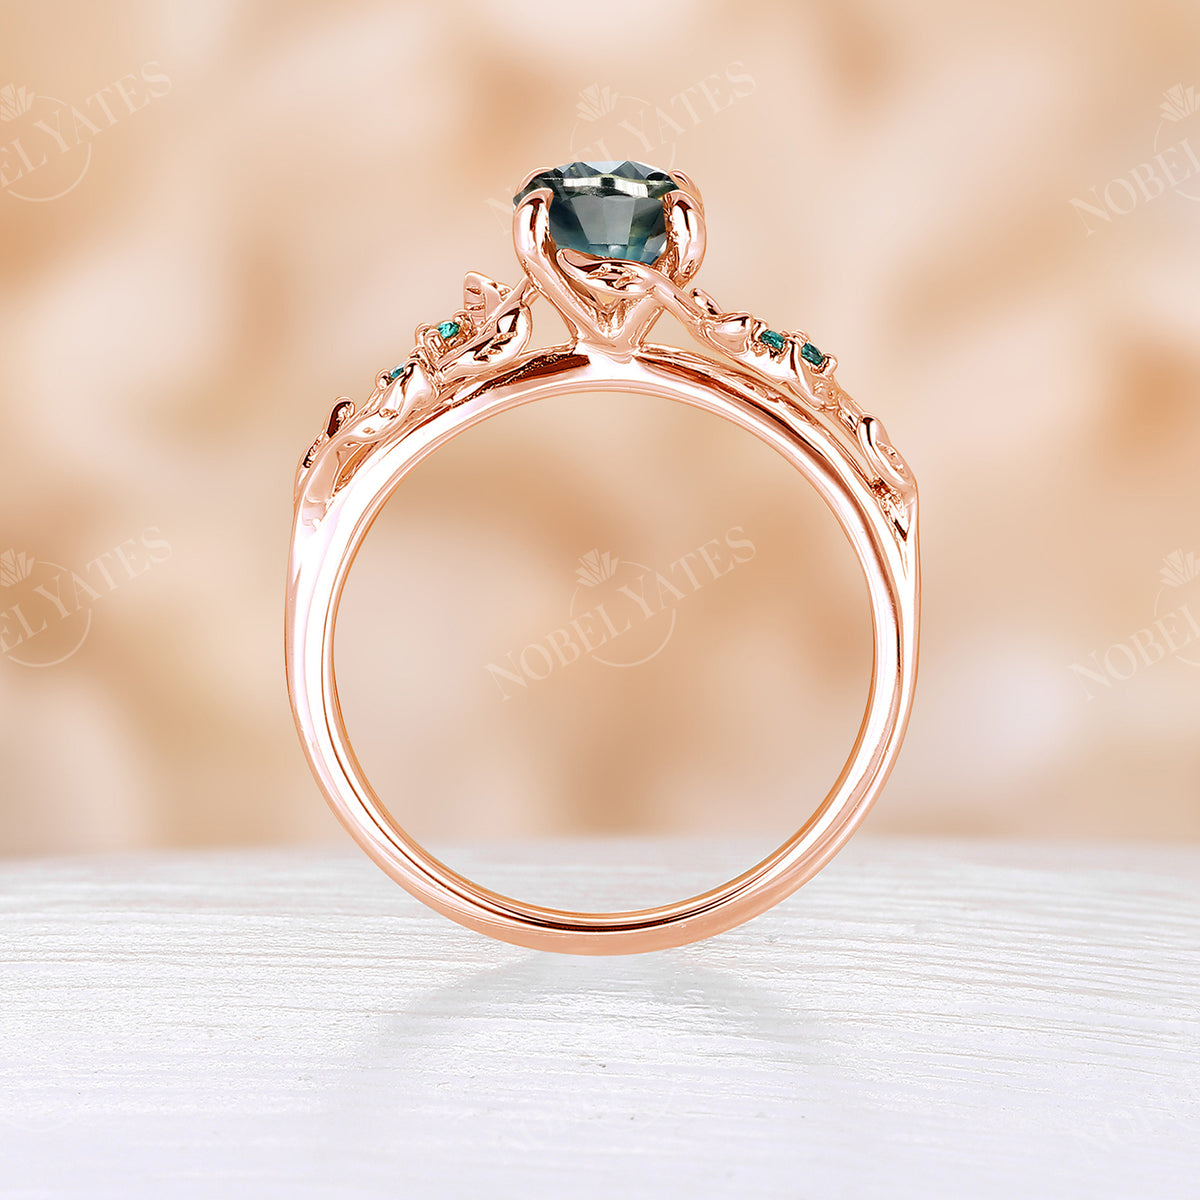 Teal Sapphire Oval Shape Nature Inspired Engagement Ring